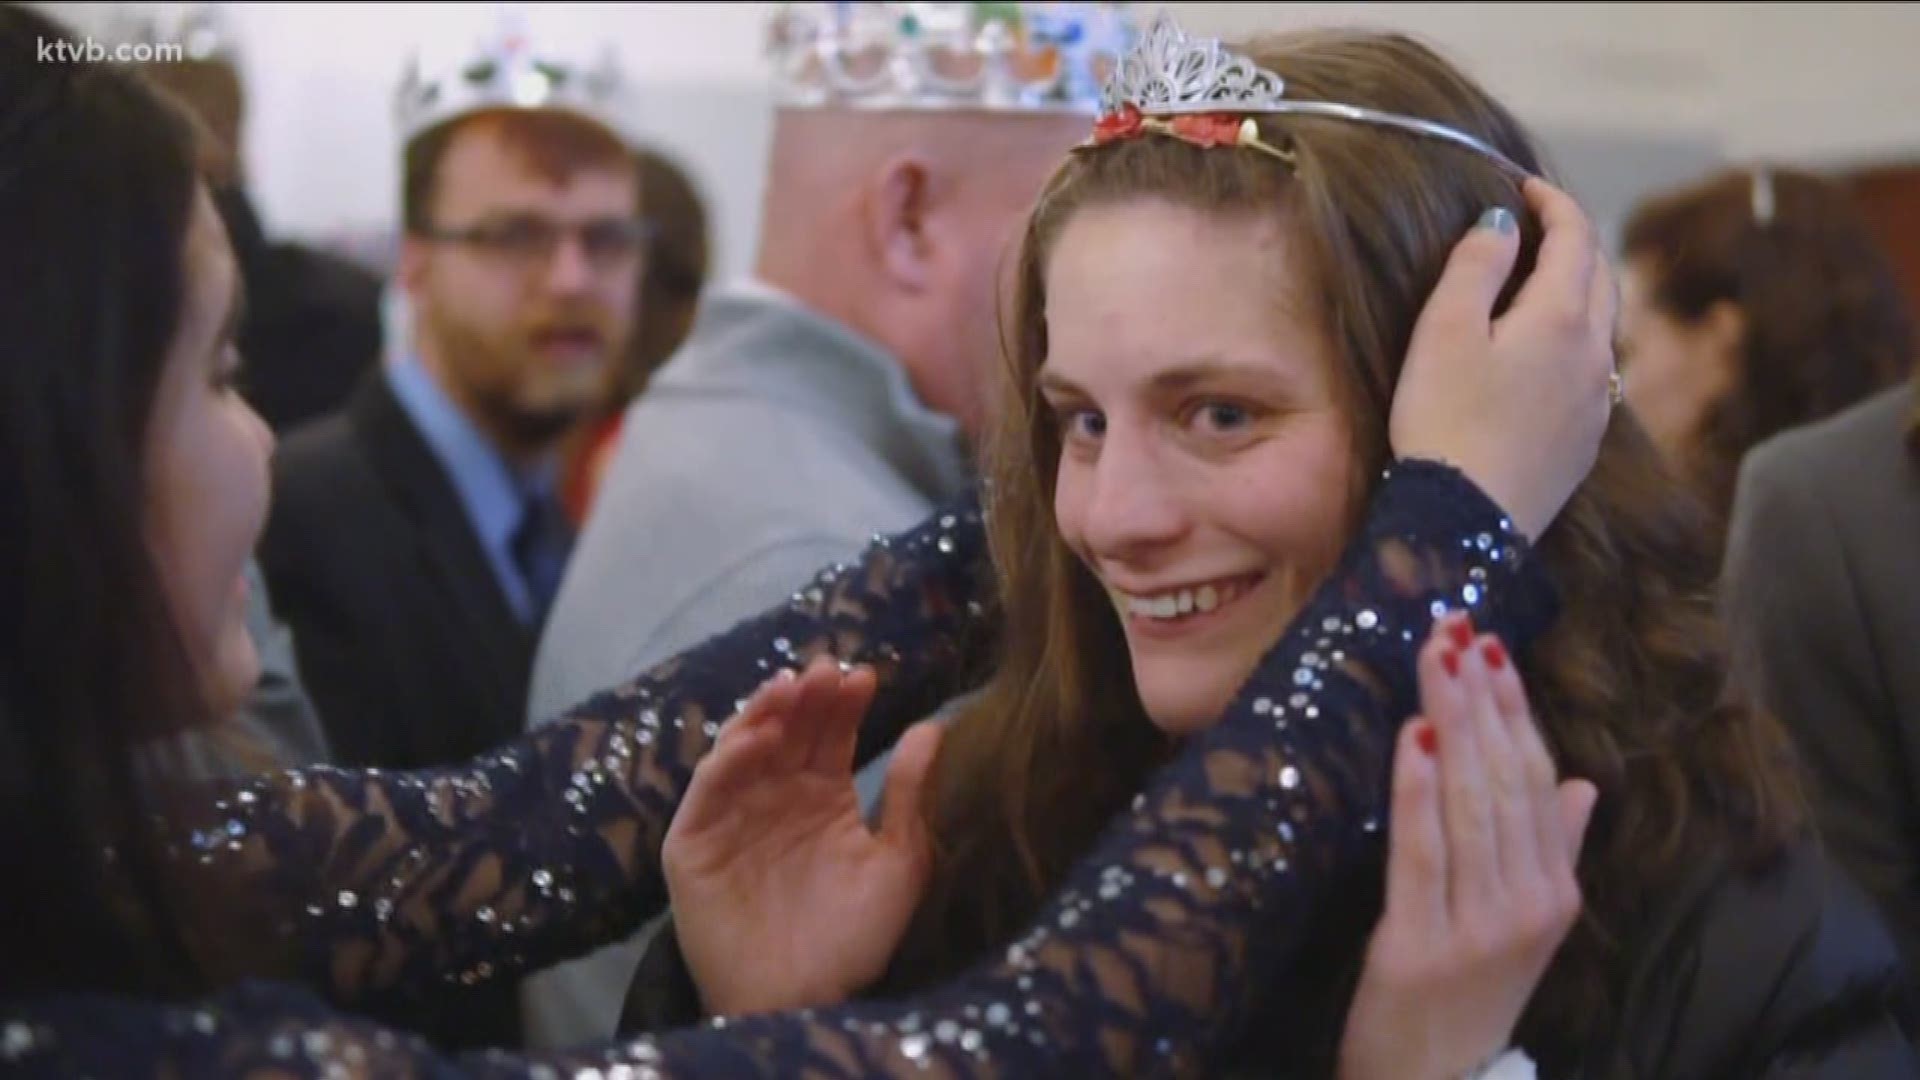 This will be the second time that Calvary Boise hosts a prom for people with special needs.